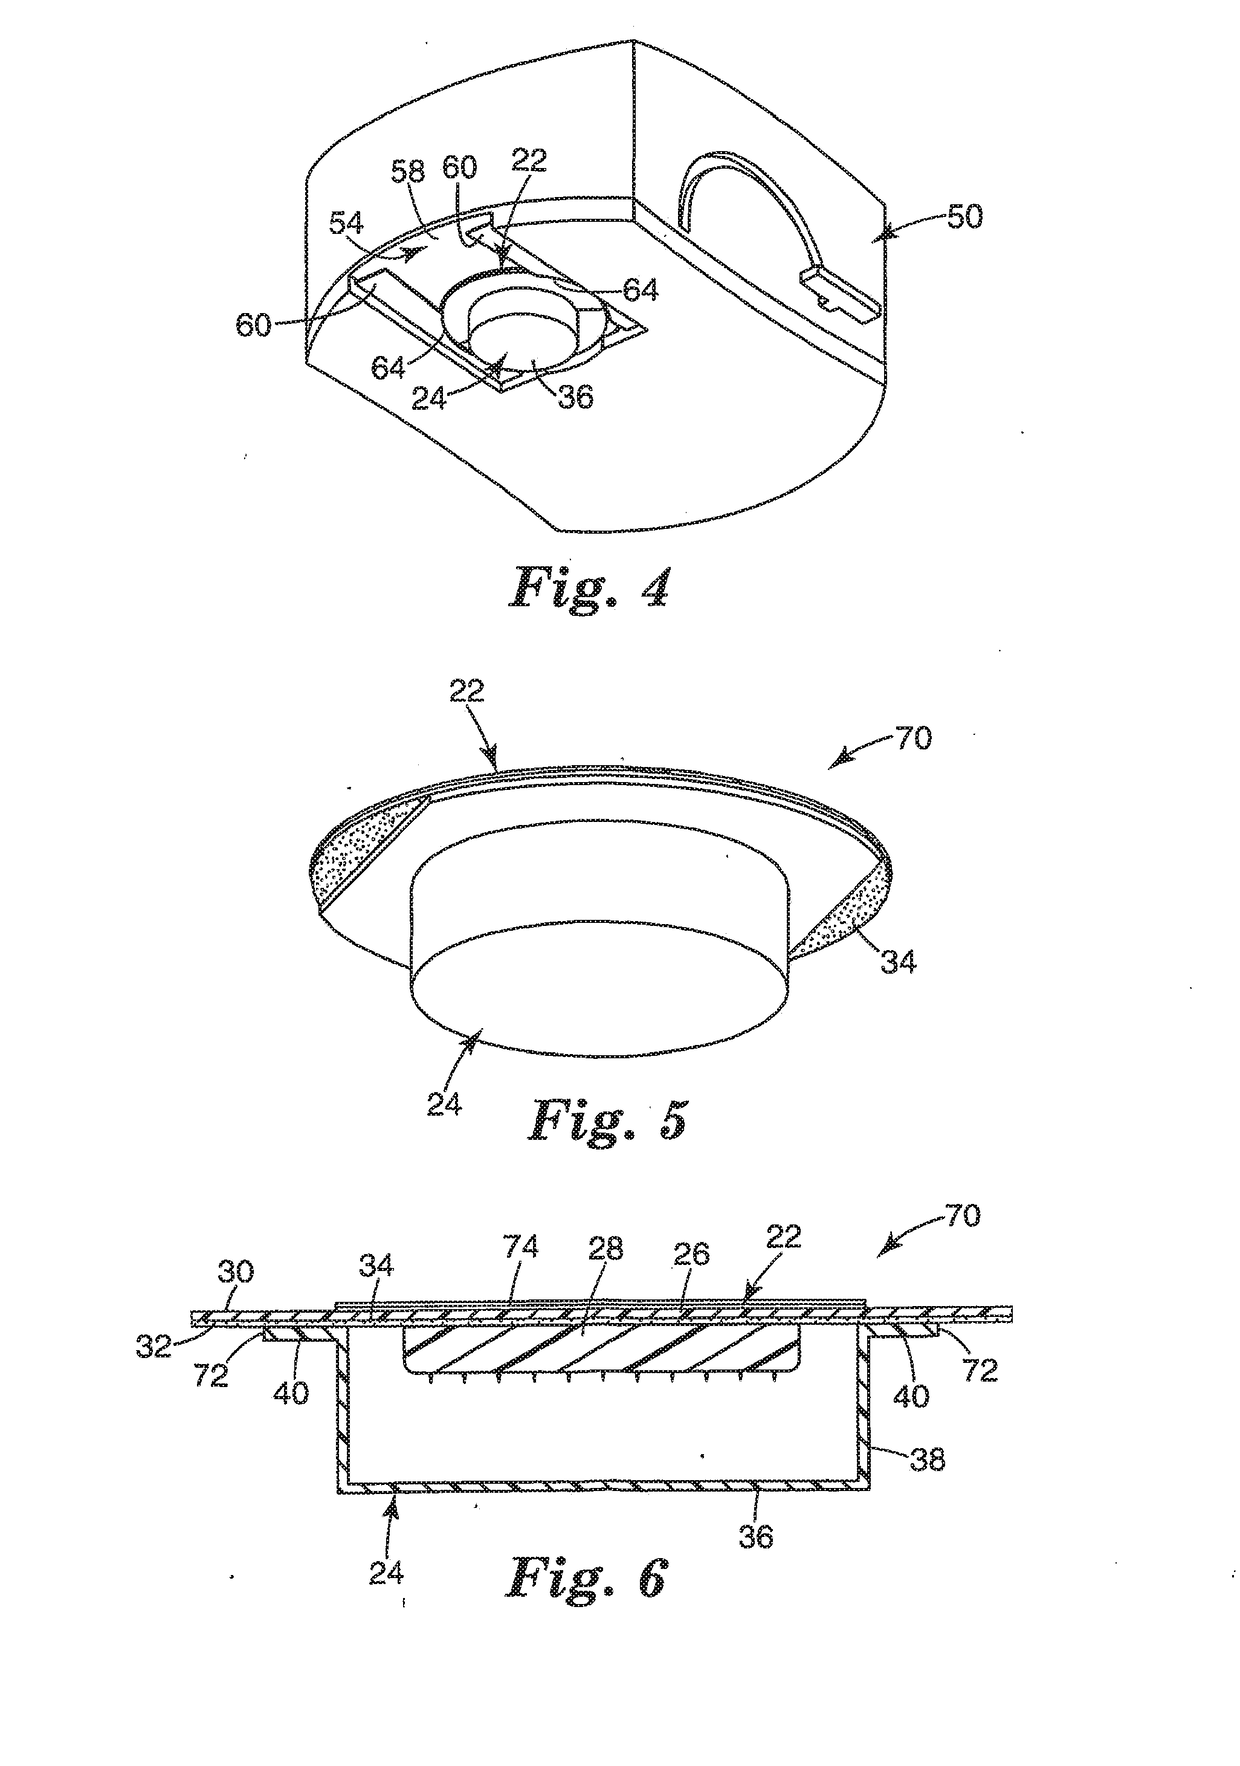 Microneedle cartridge assembly and method of applying